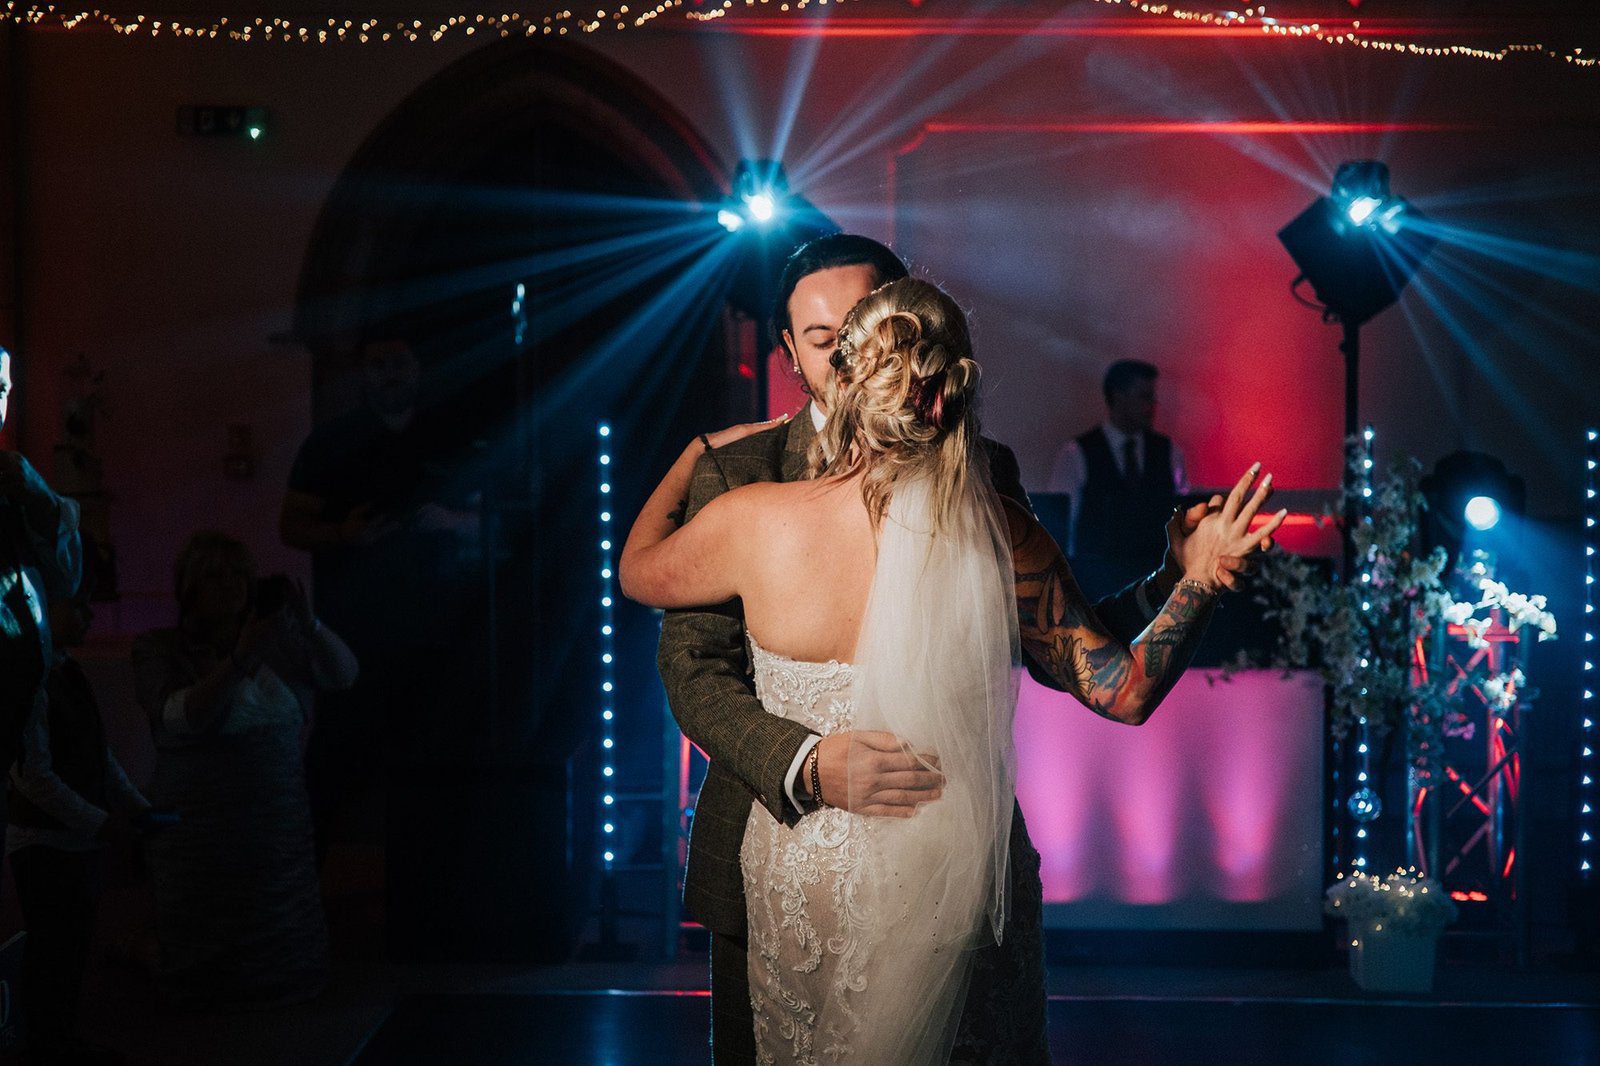 Alverton Hotel documentary wedding photography by Younger photography